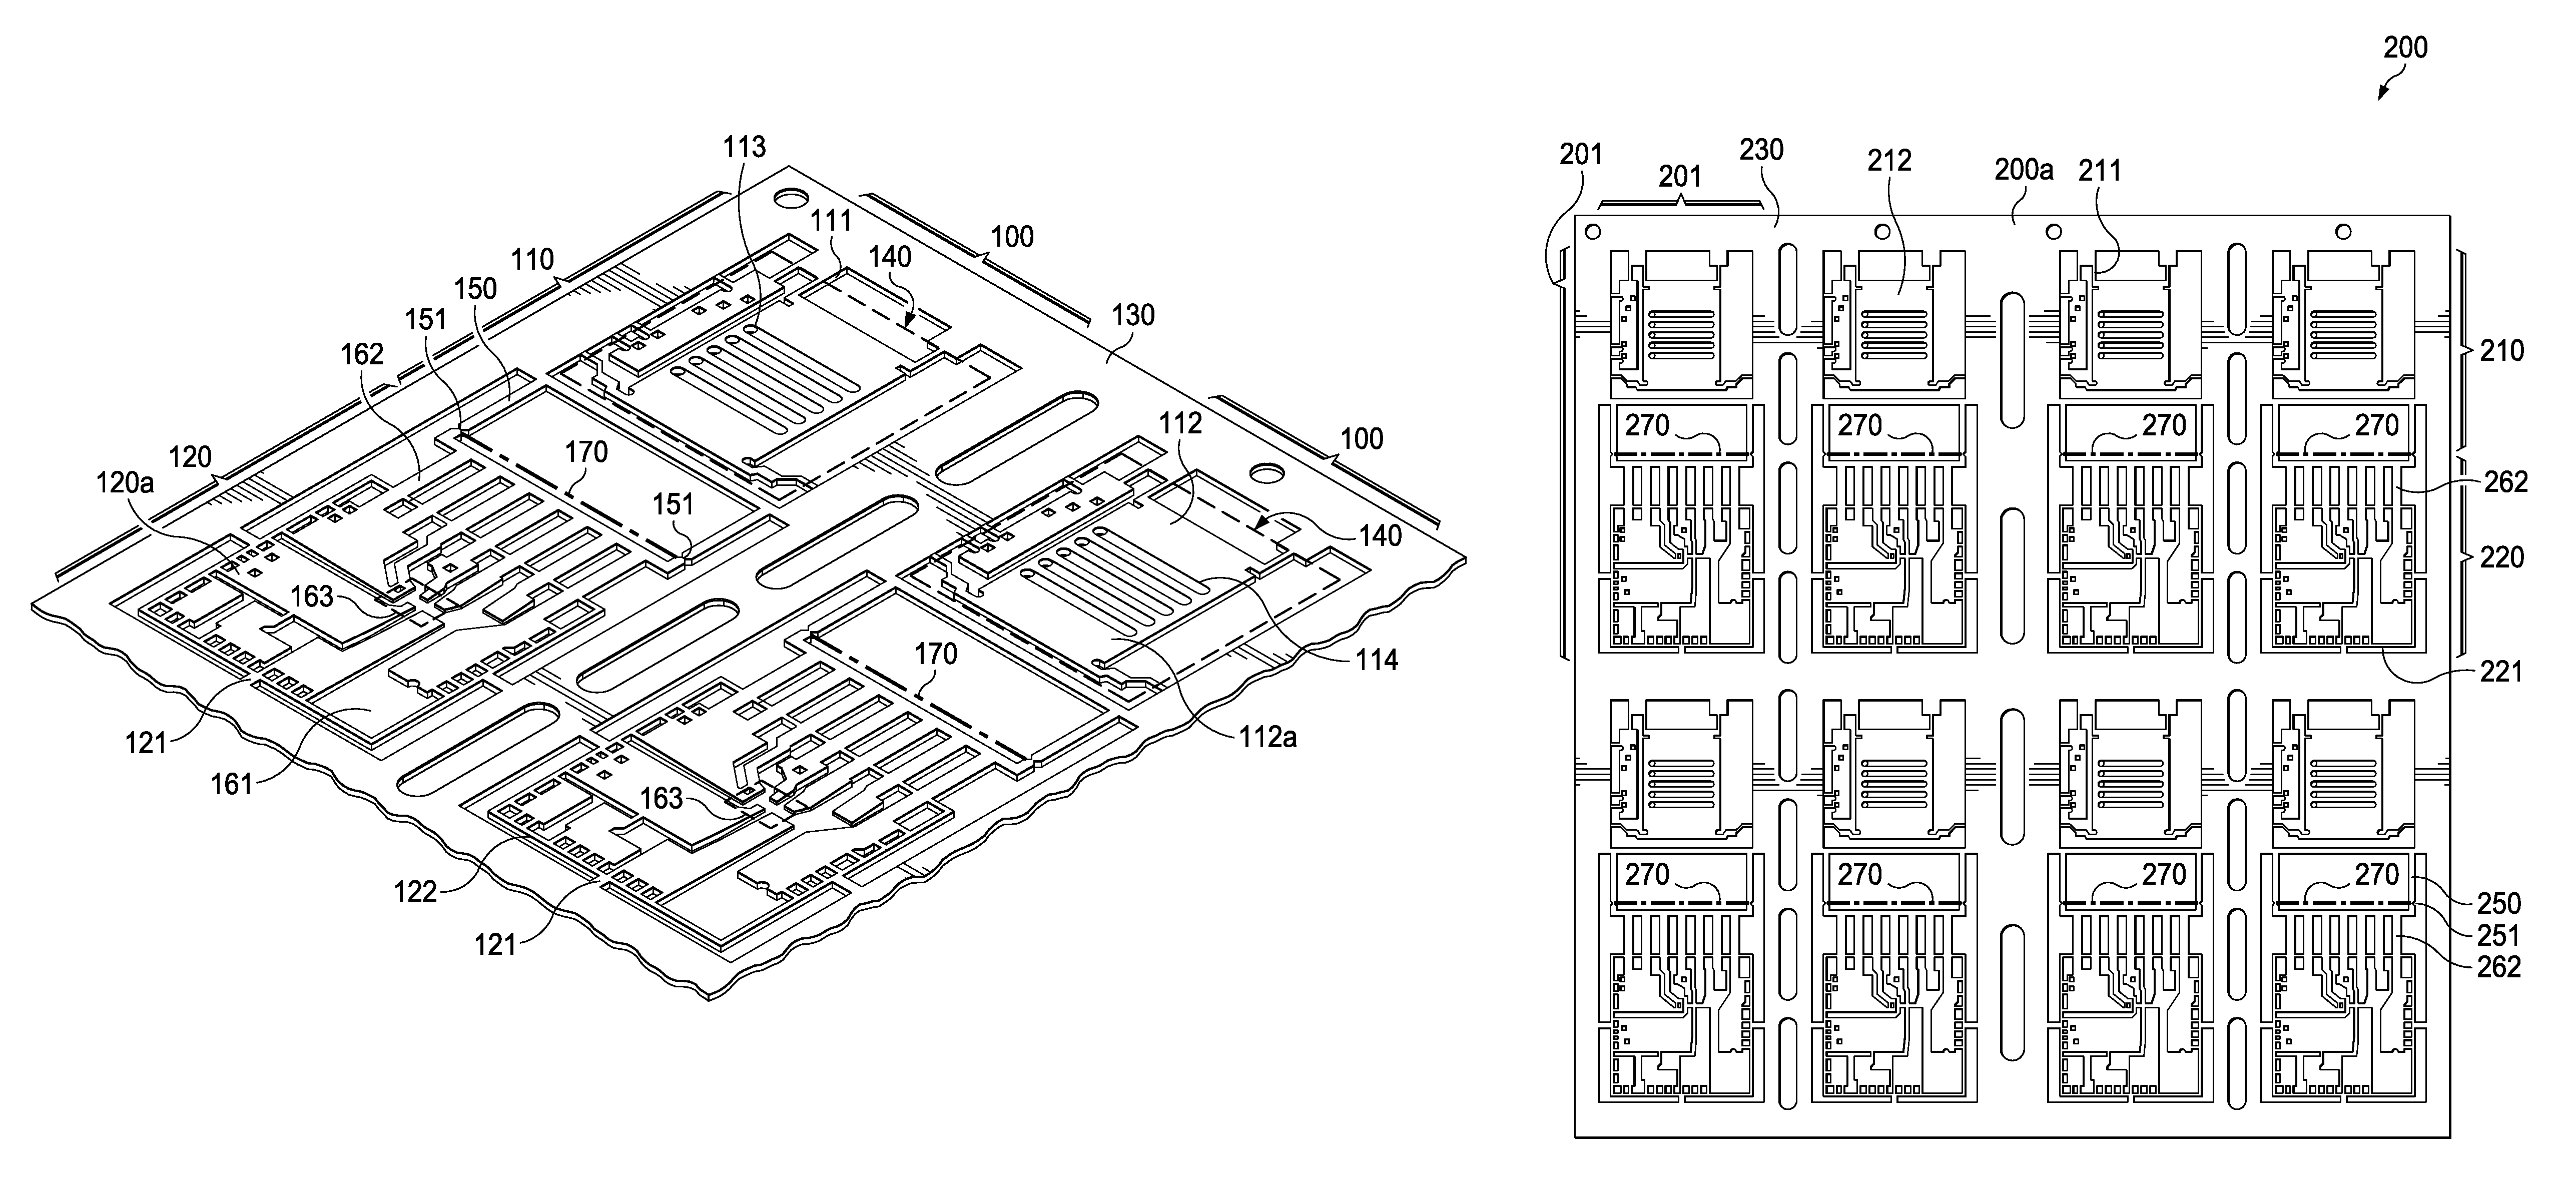 Flippable leadframe for packaged electronic system having vertically stacked chips and components